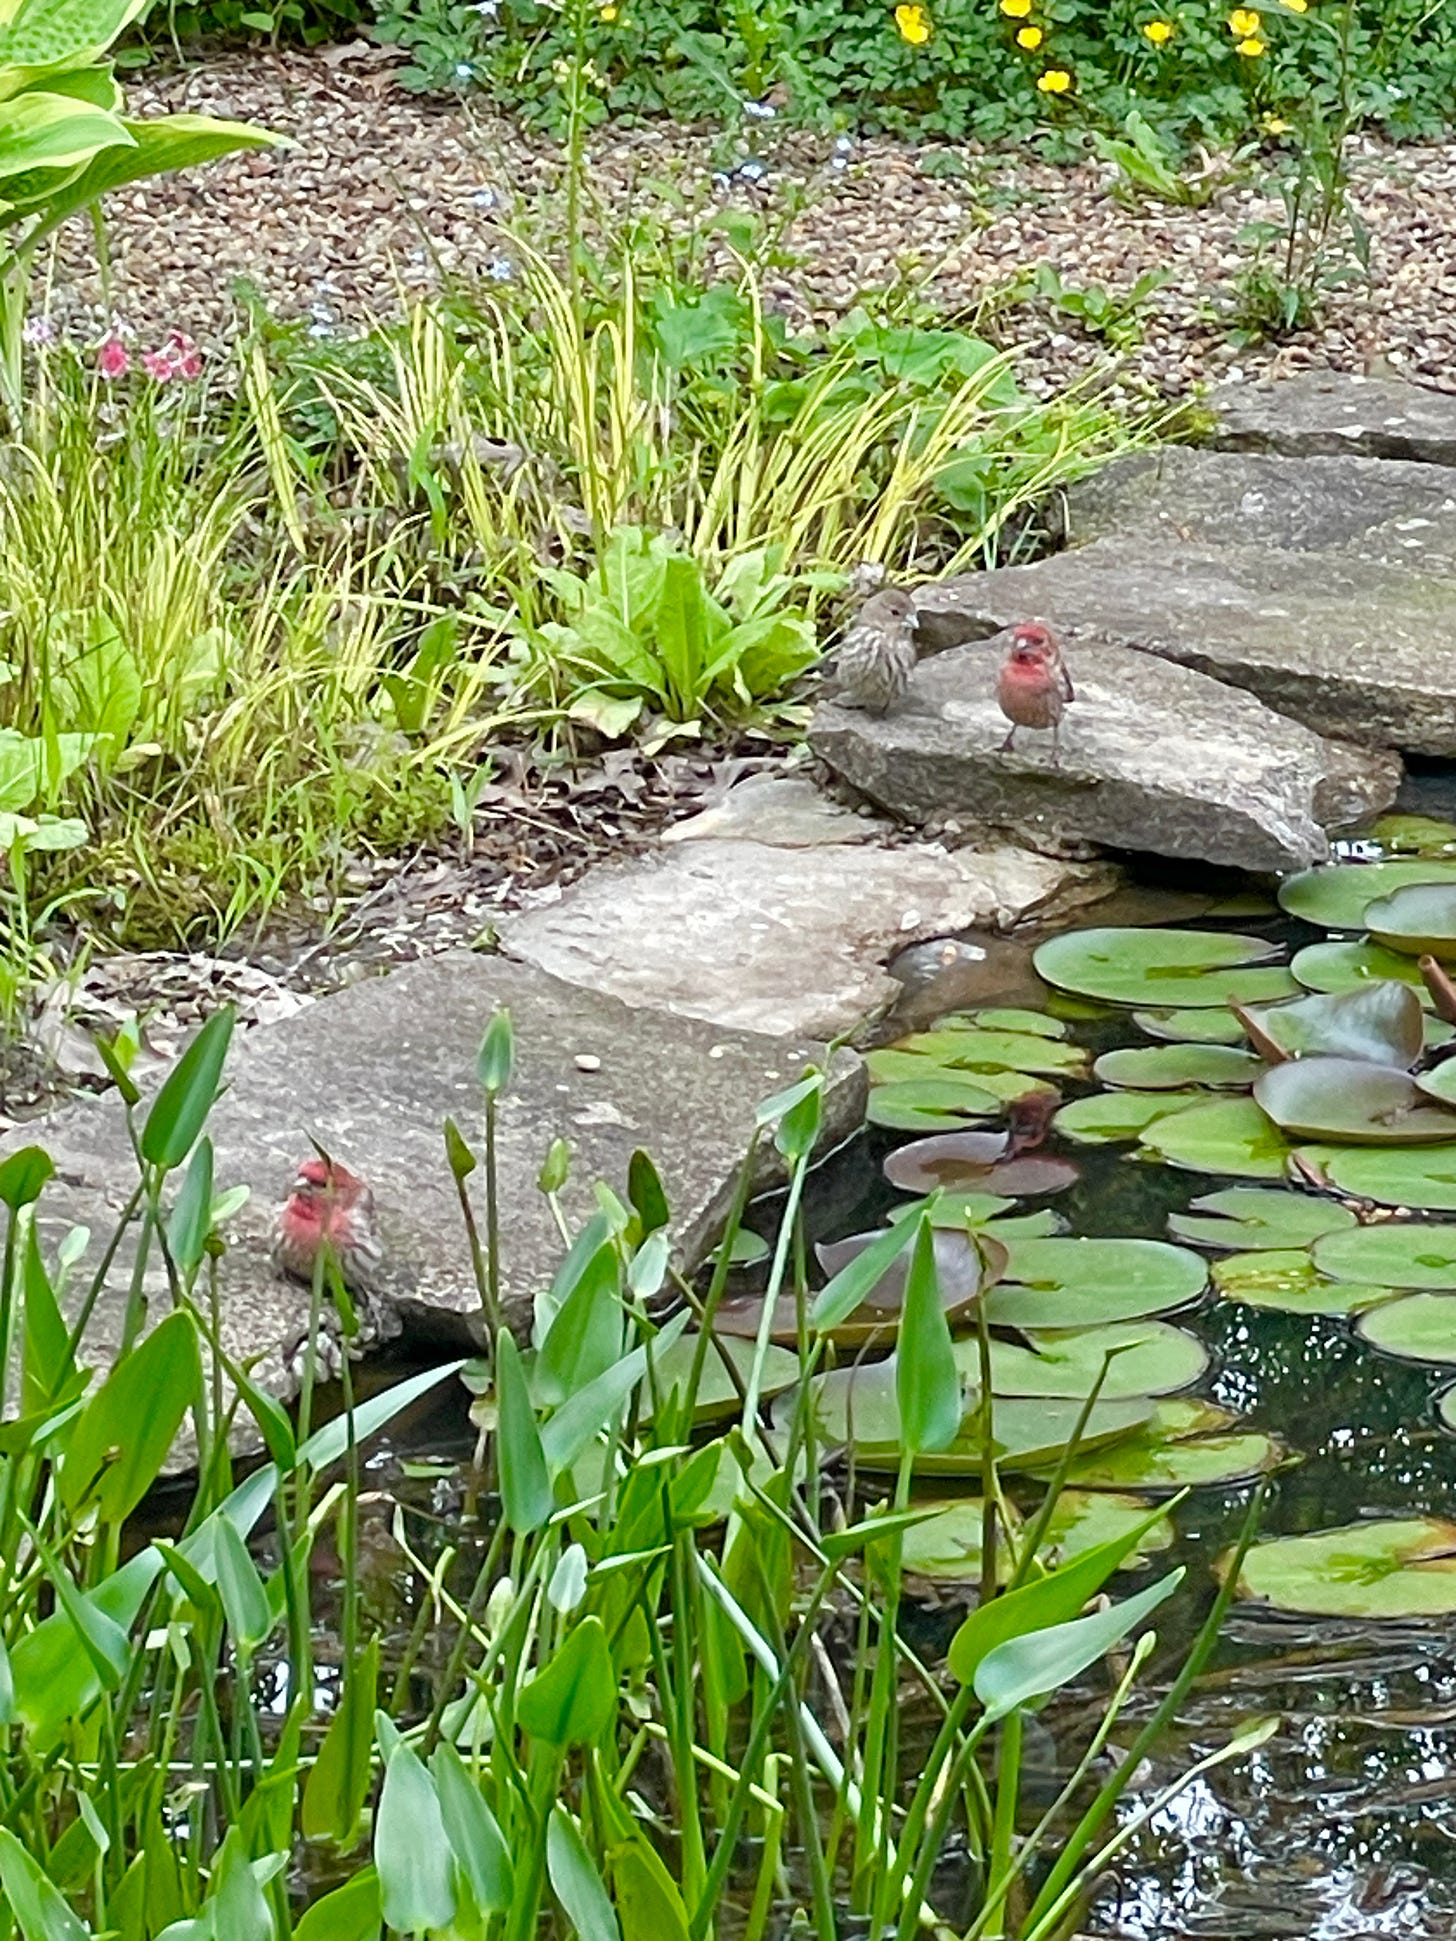 House finches taking a rest on the stones between the pond and bog near the potting shed